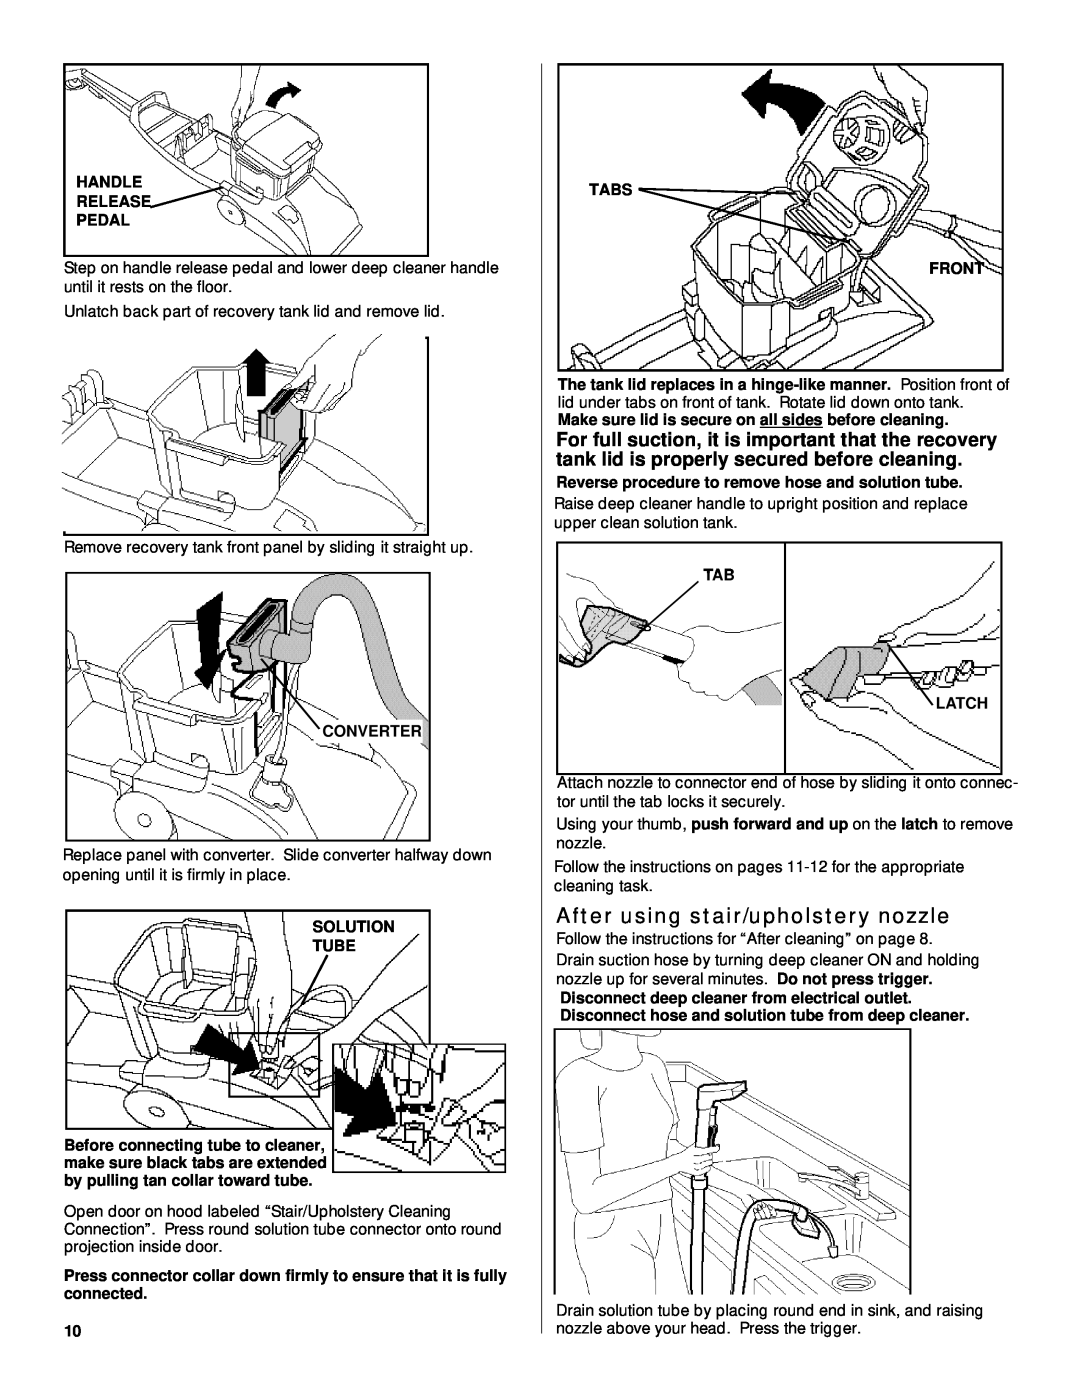 Hoover Deep Cleaner owner manual After using stair/upholstery nozzle 